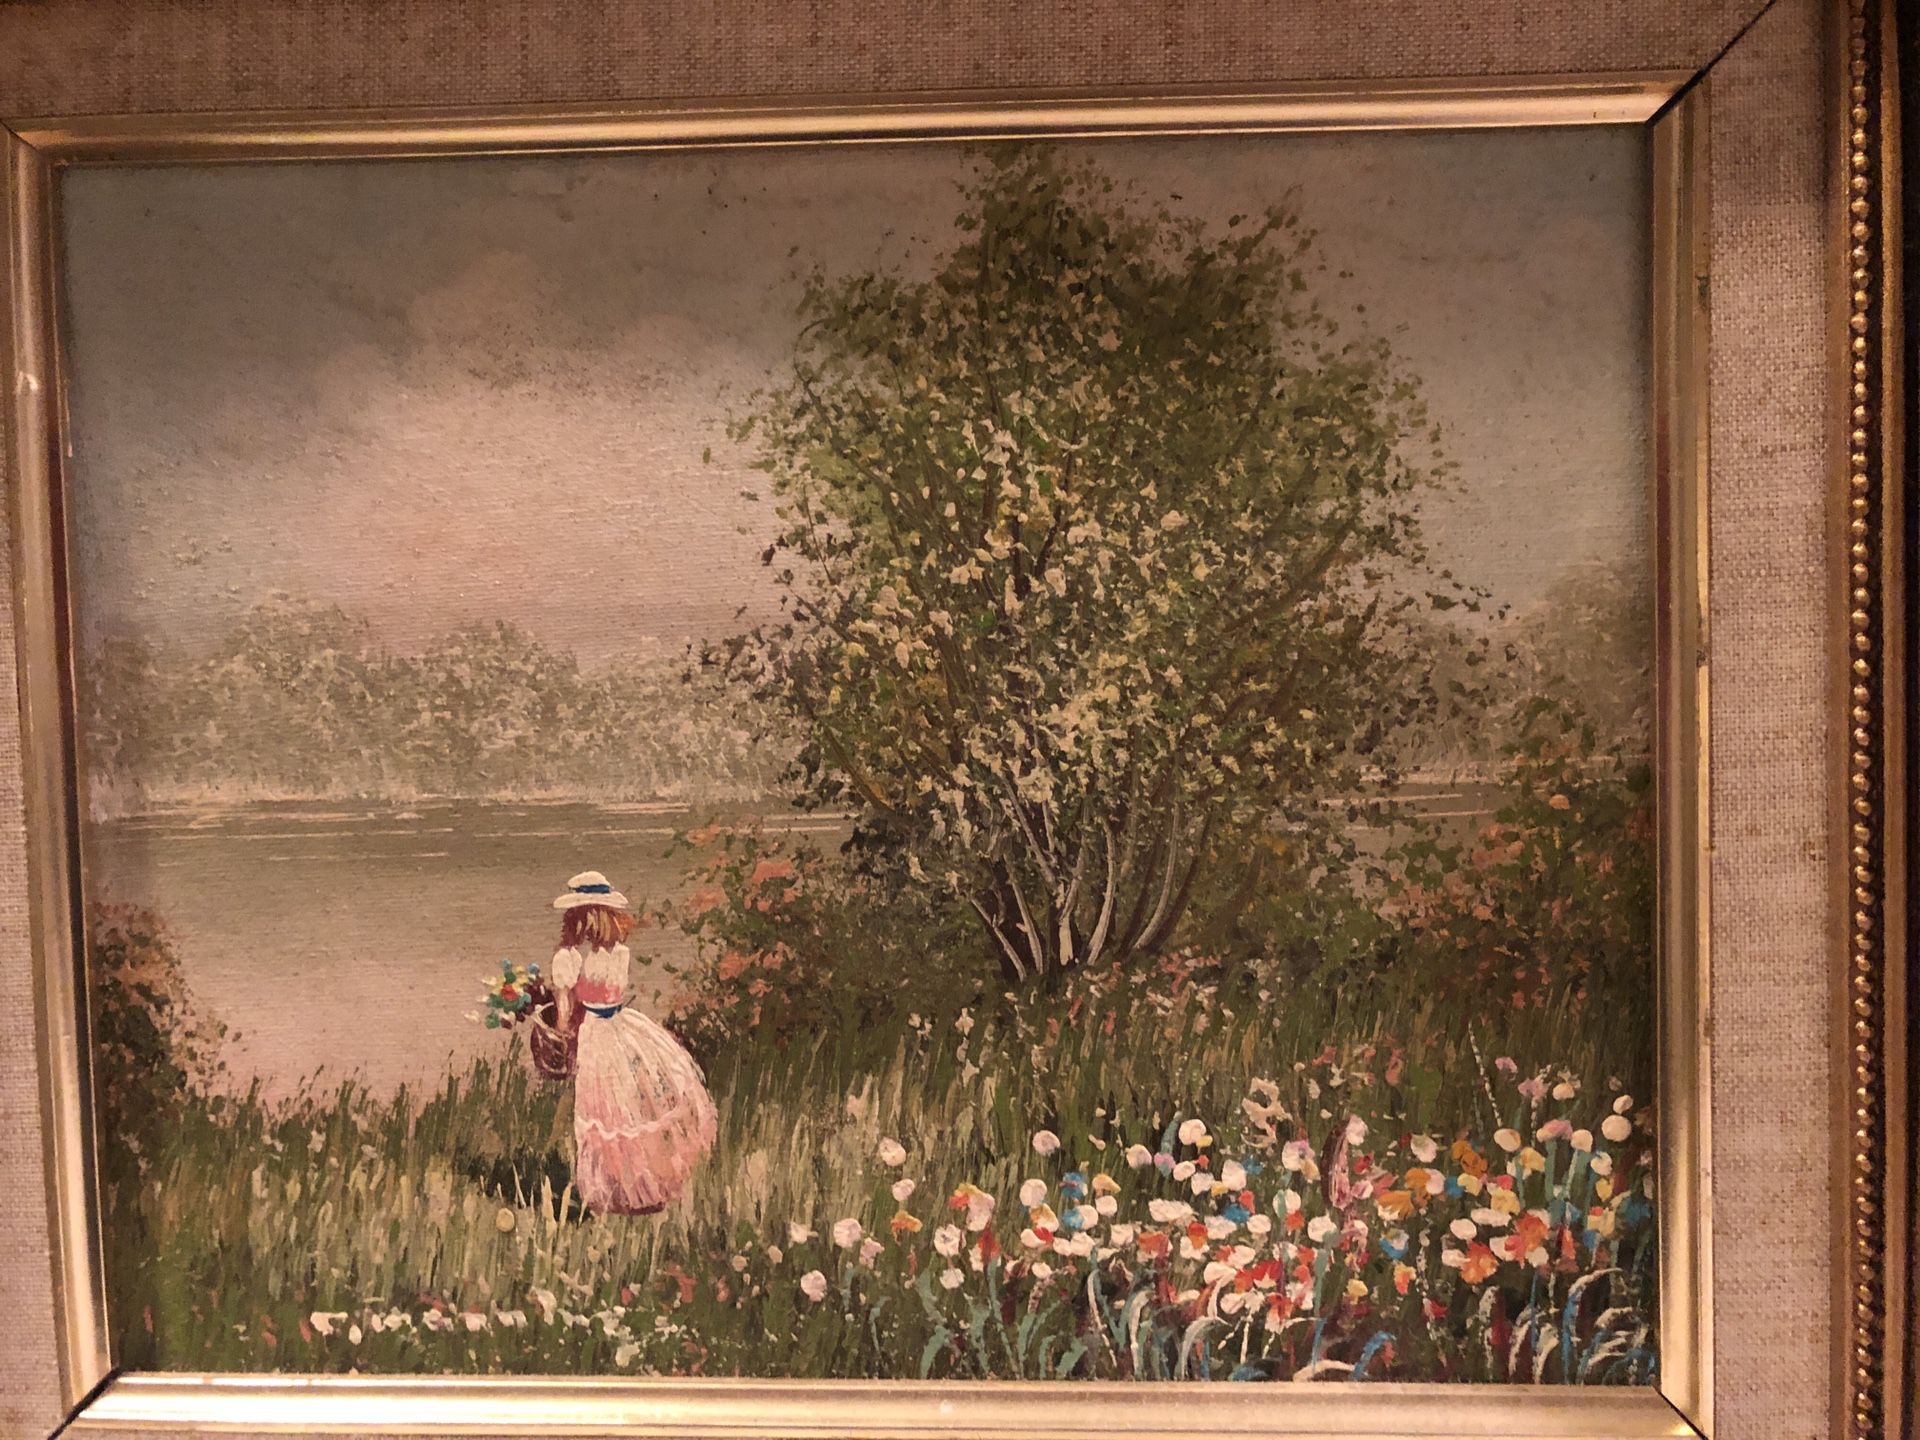 Wood- Framed oil painting of a girl standing by the lake